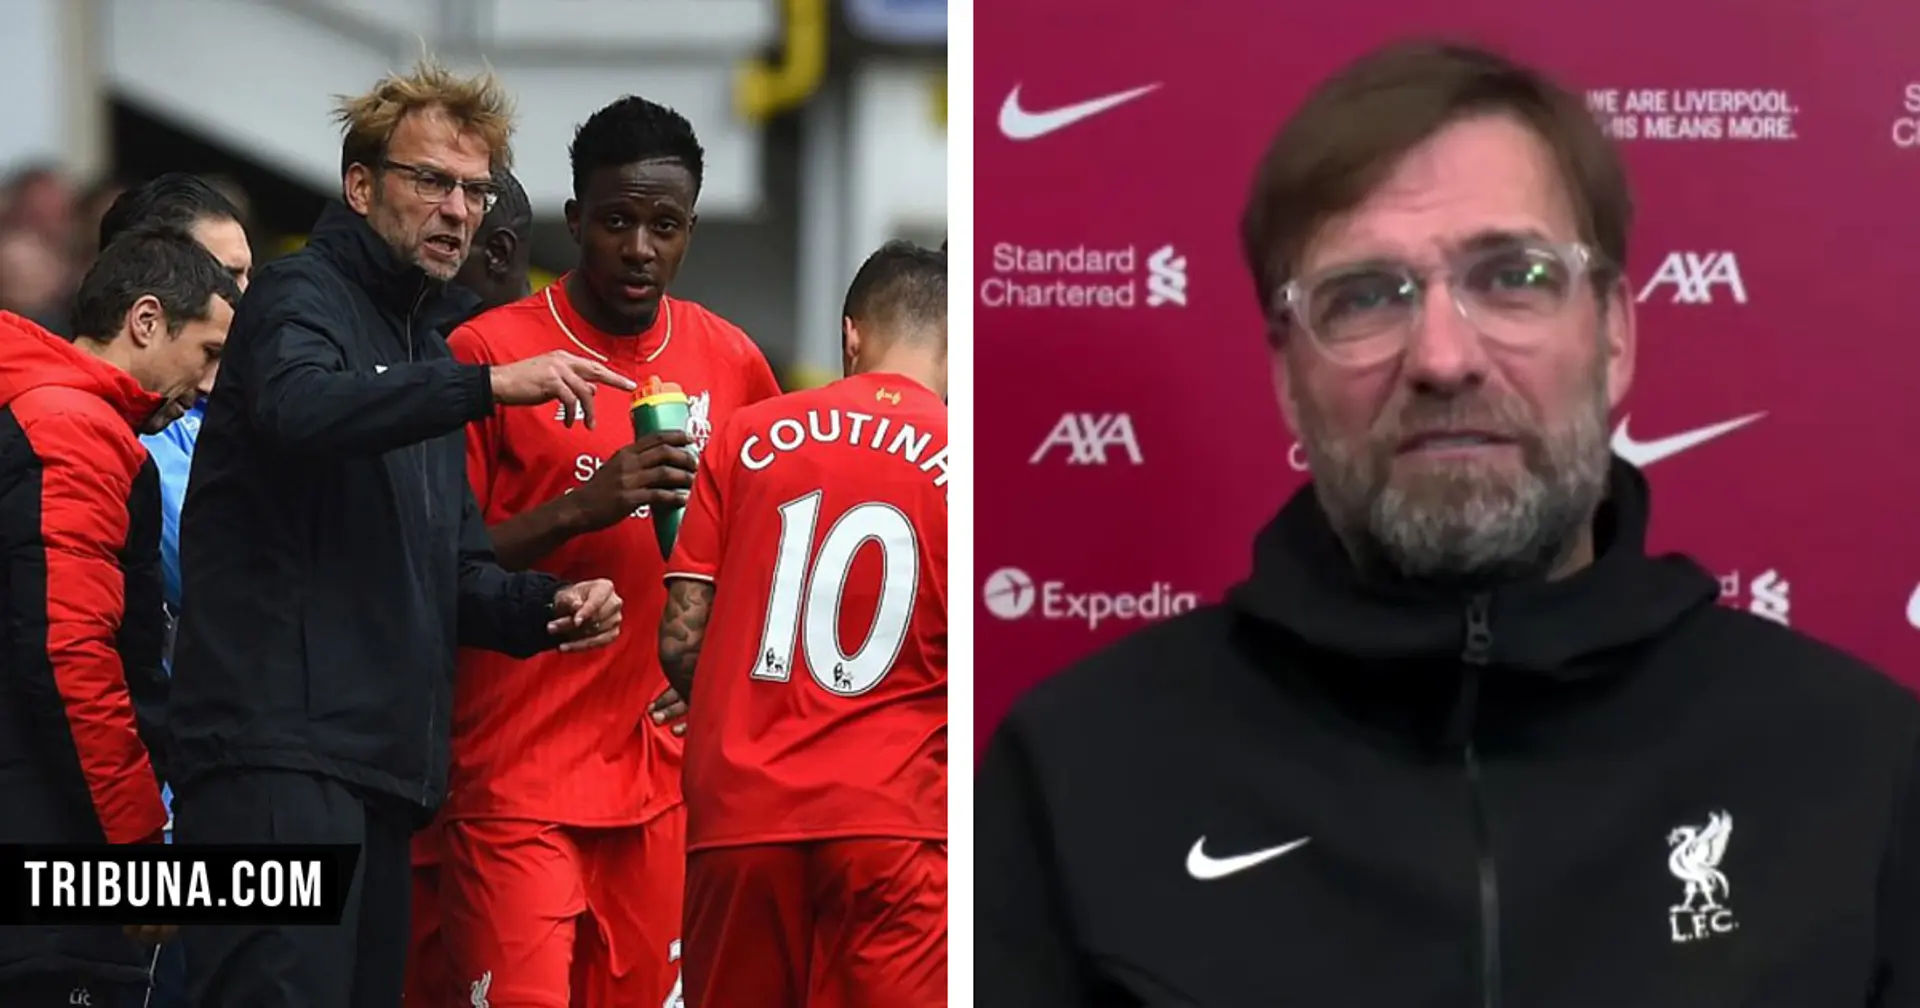 'When I arrived in England, they had the most talented squad': Klopp recalls facing Tottenham in his 1st game in charge of Liverpool